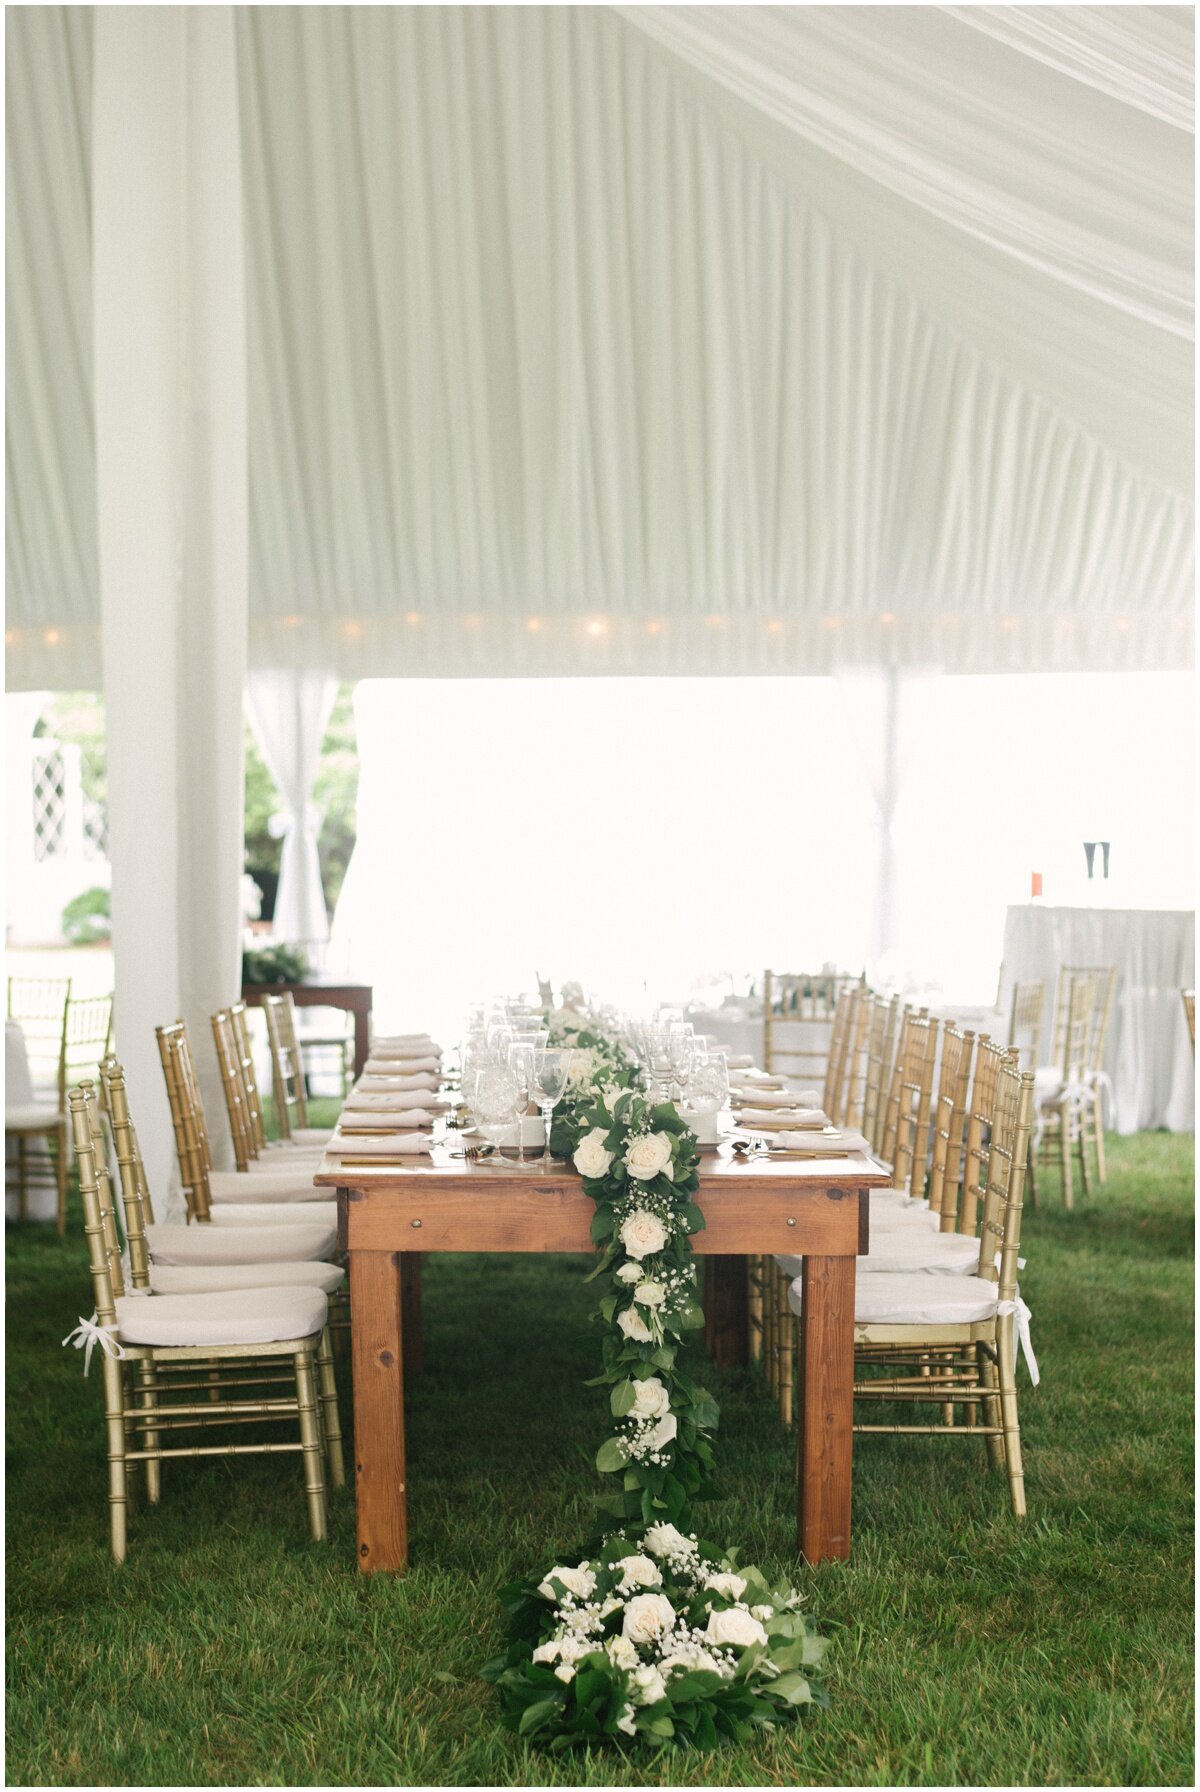  family-style seating for tented wedding reception at private estate wedding 